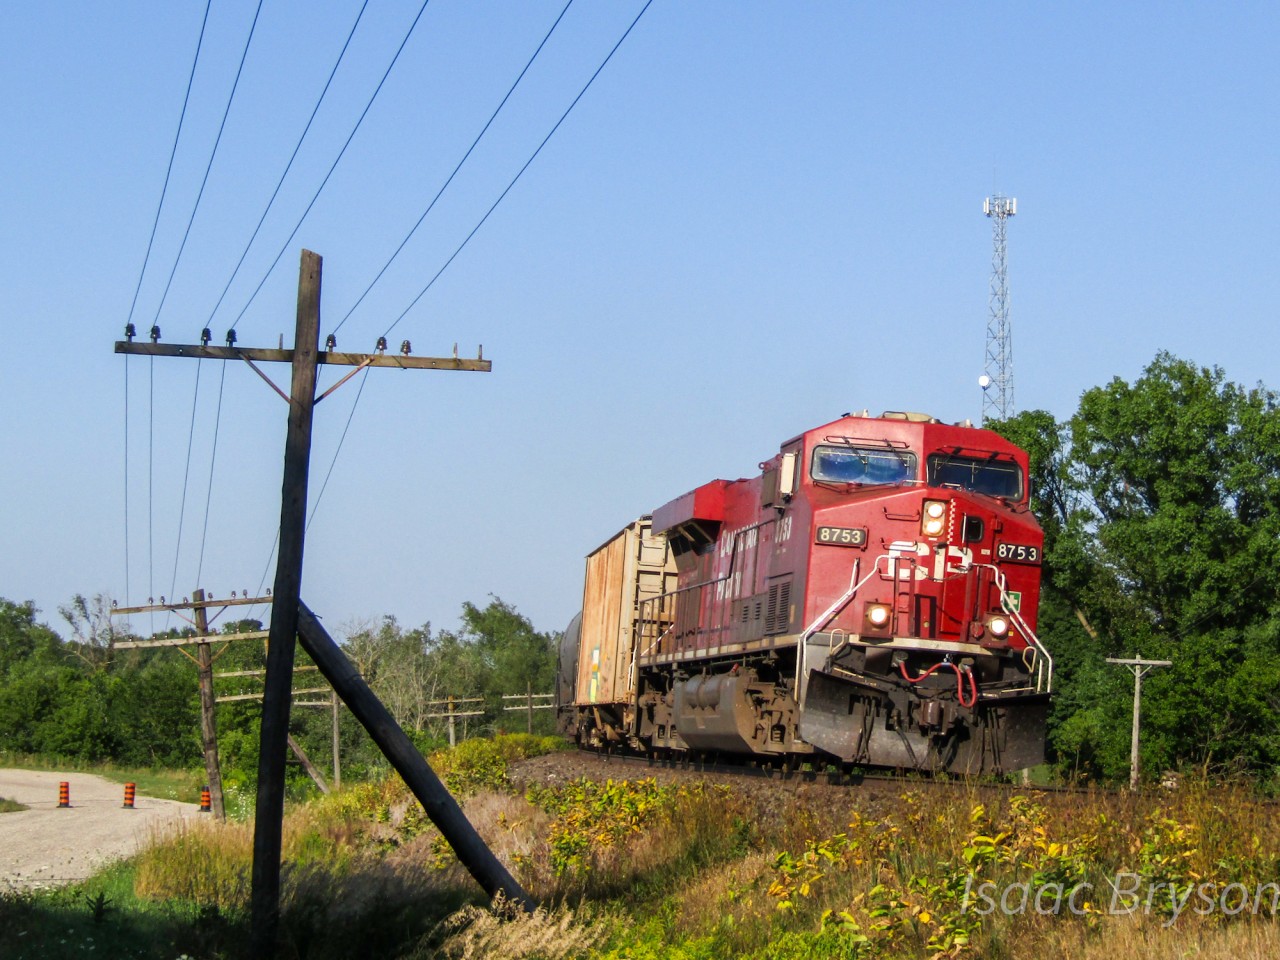 CP 651 flies westbound through Innerkip Ontario with CP 8753 leading the way. Exactly 4 1/2 days after catching 650 eastbound with the same power, 651 returns just 10 minutes after the sun hid behind a large pine tree, casting shadows on the telegraph pole.